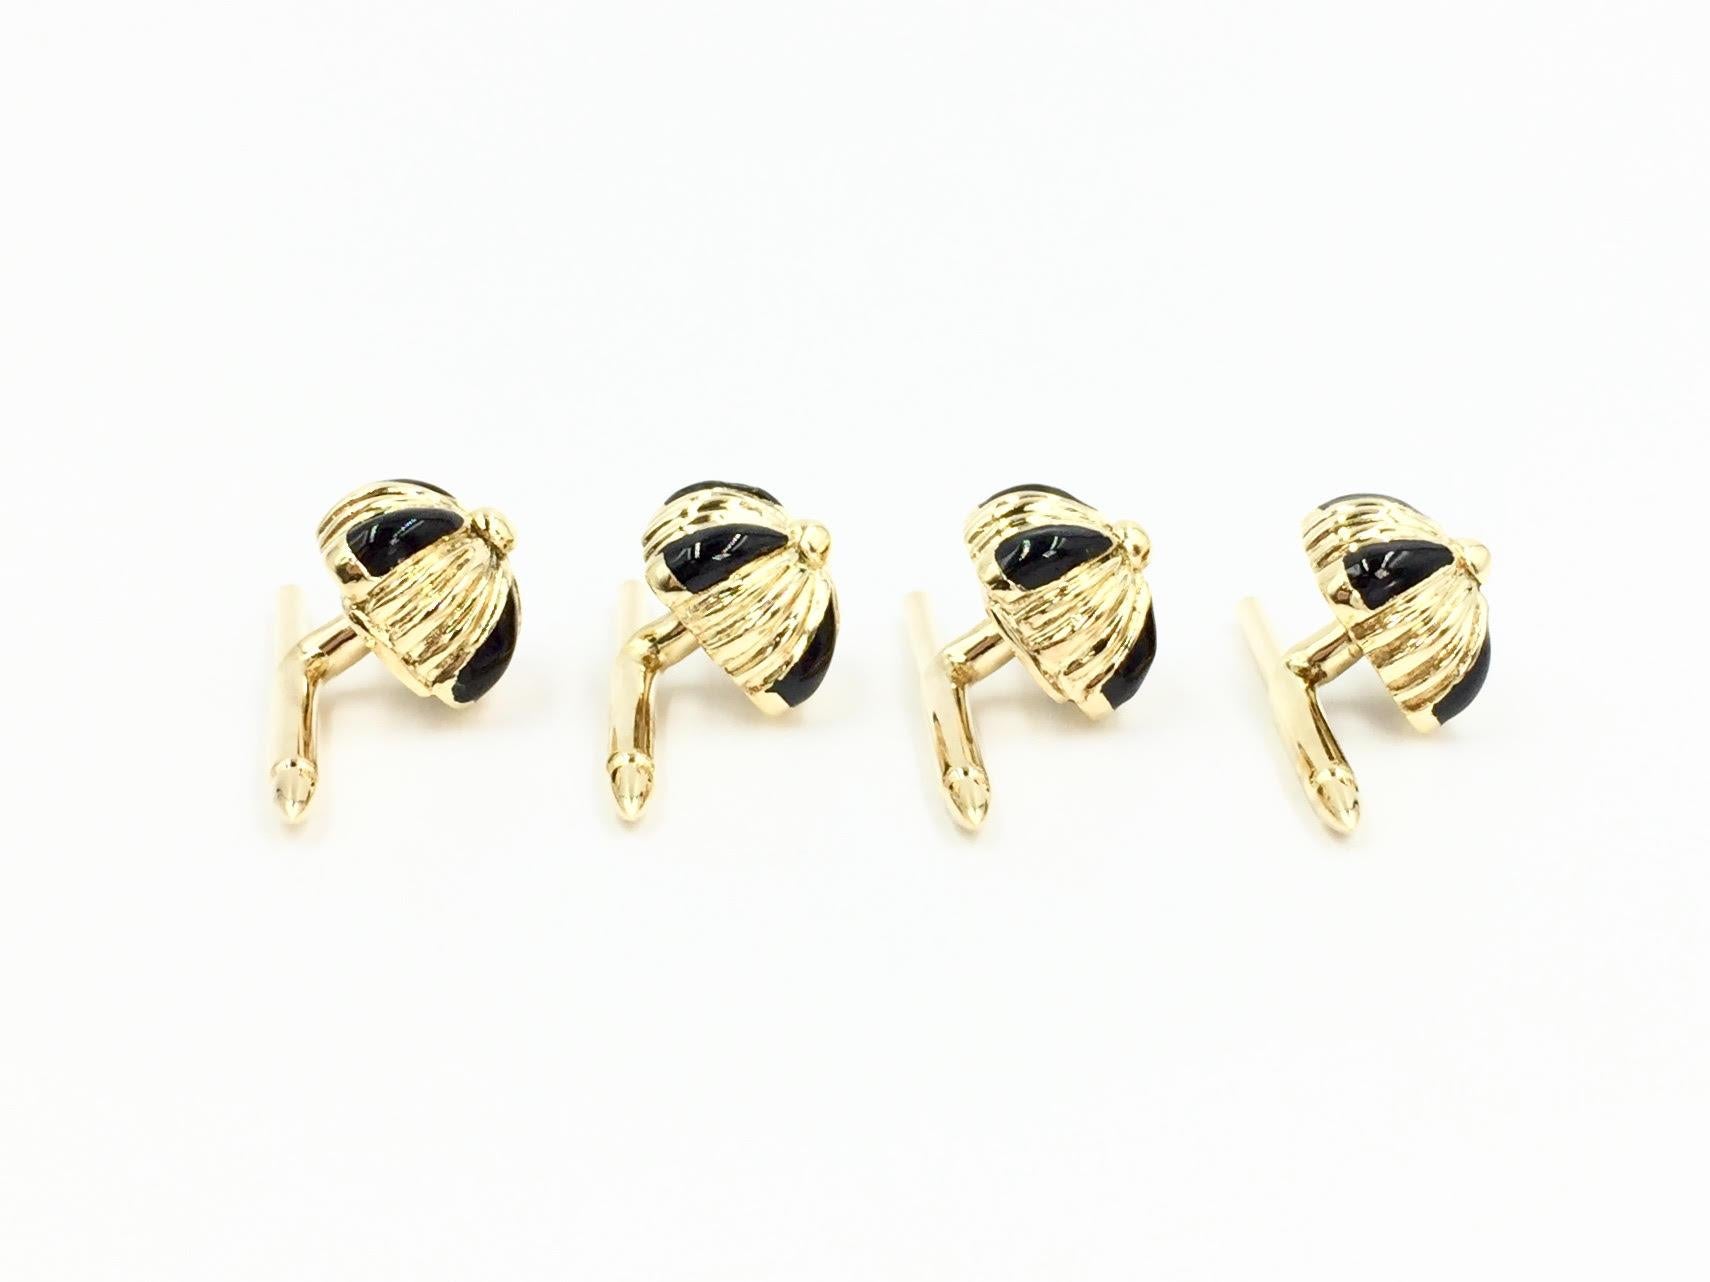 Made with impeccable craftsmanship by Louis Tamis & Sons Company. This set of four 18 karat yellow gold cushion shaped shirt studs have a fluted design with polished onyx at each corner. Cushion box measures 11mm x 11mm. Spring loaded bars work